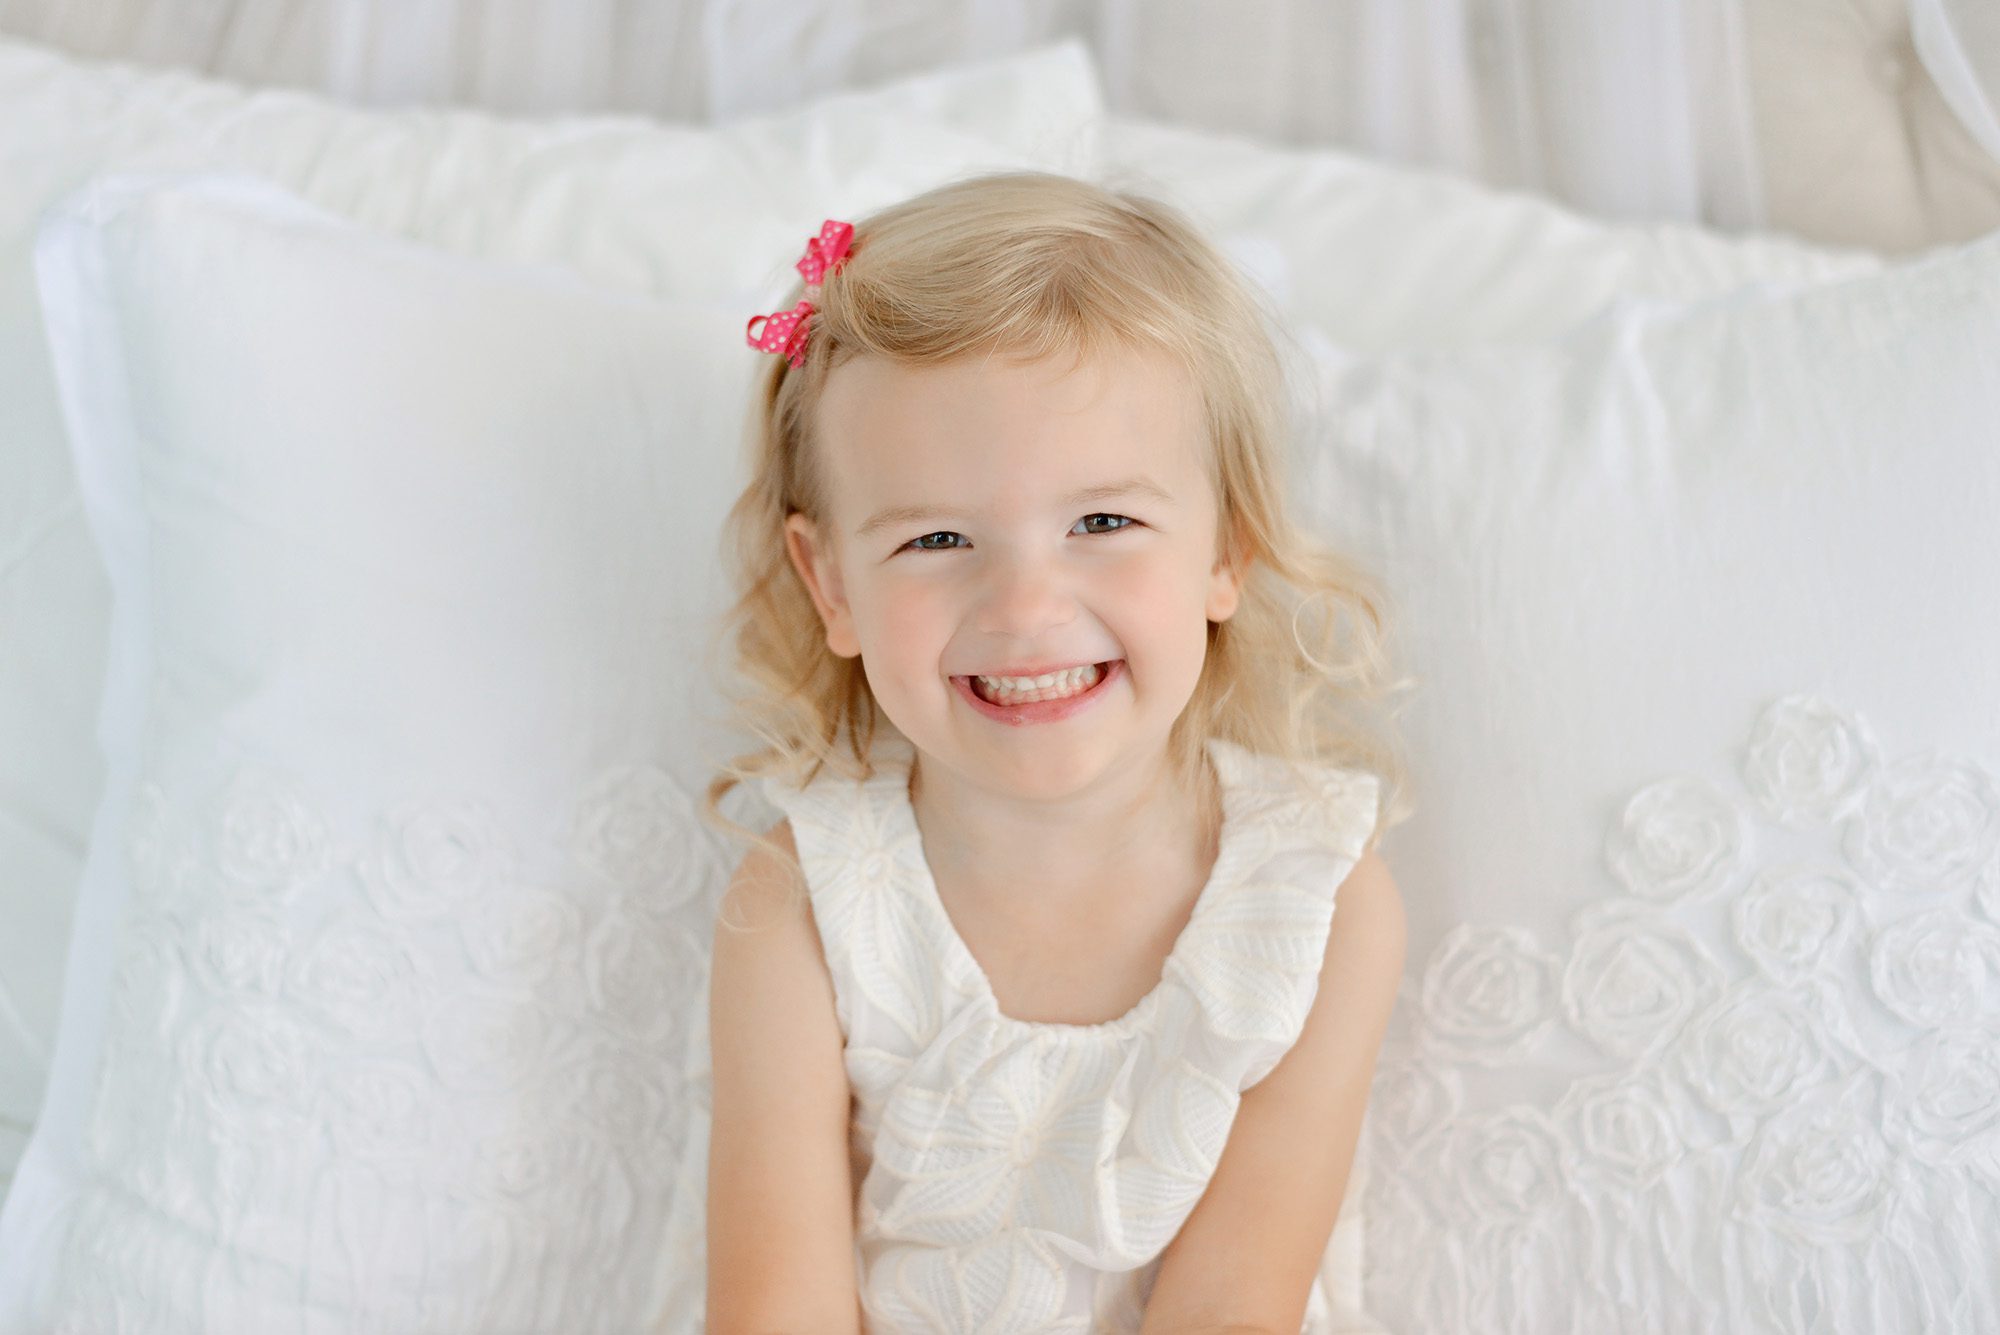 Mom and daughter happily snuggling and giggling on a white bed in a studio for a portrait session